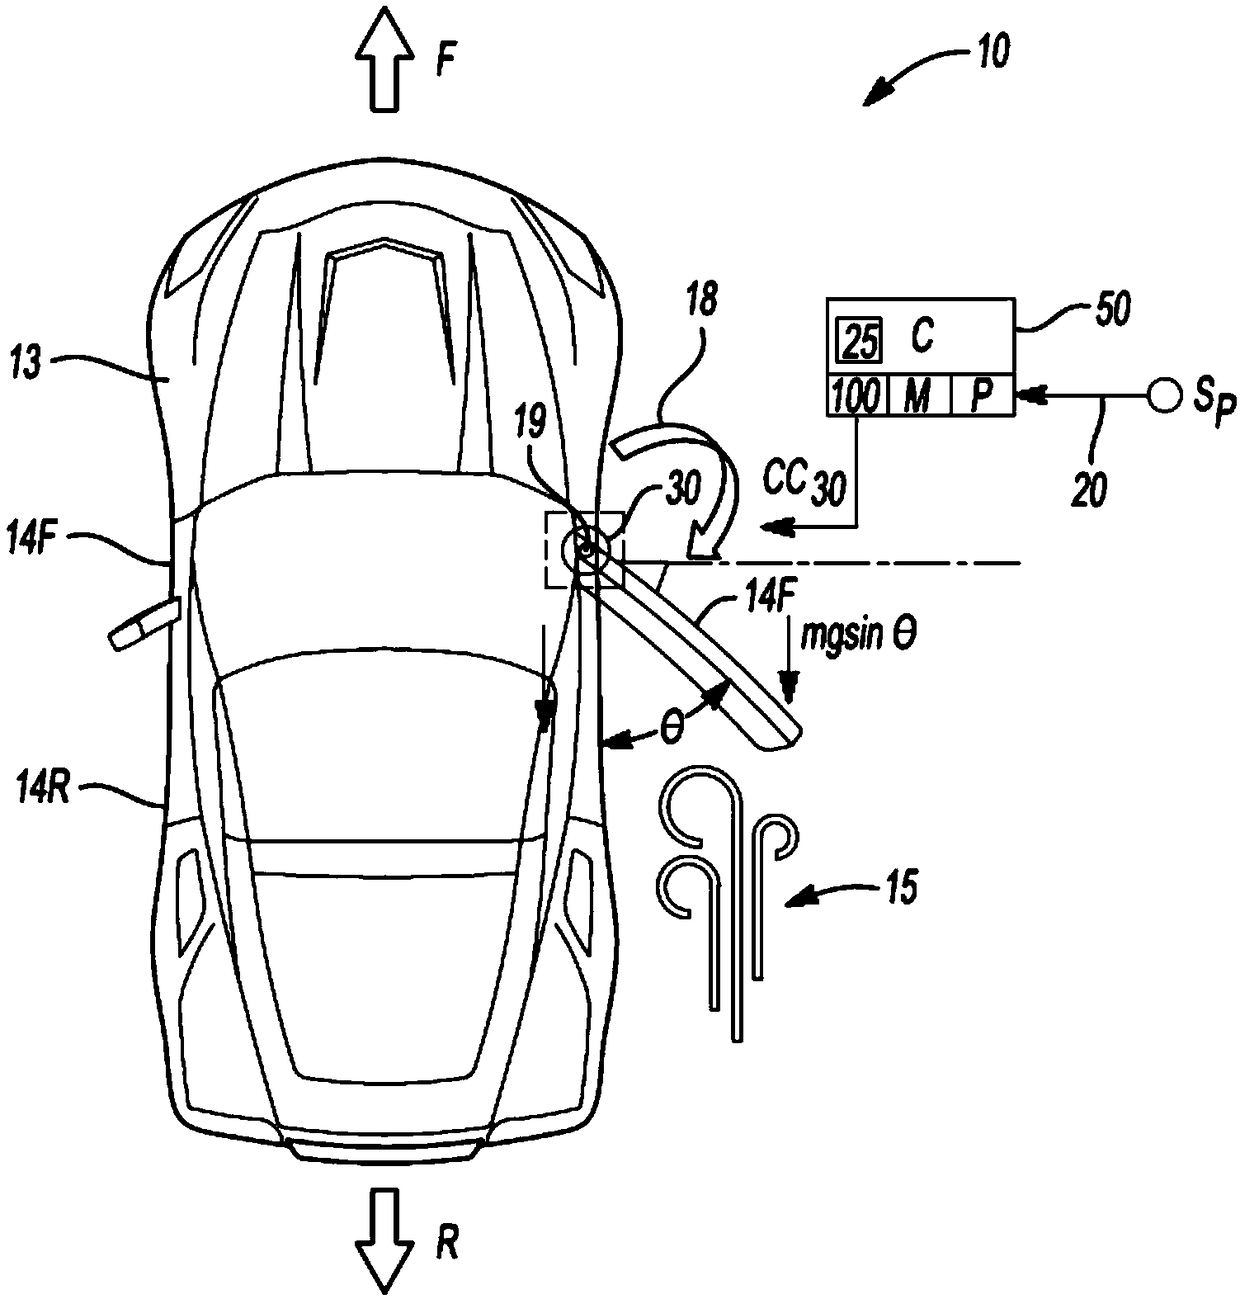 Vehicle with power swinging door and position-based torque compensation method